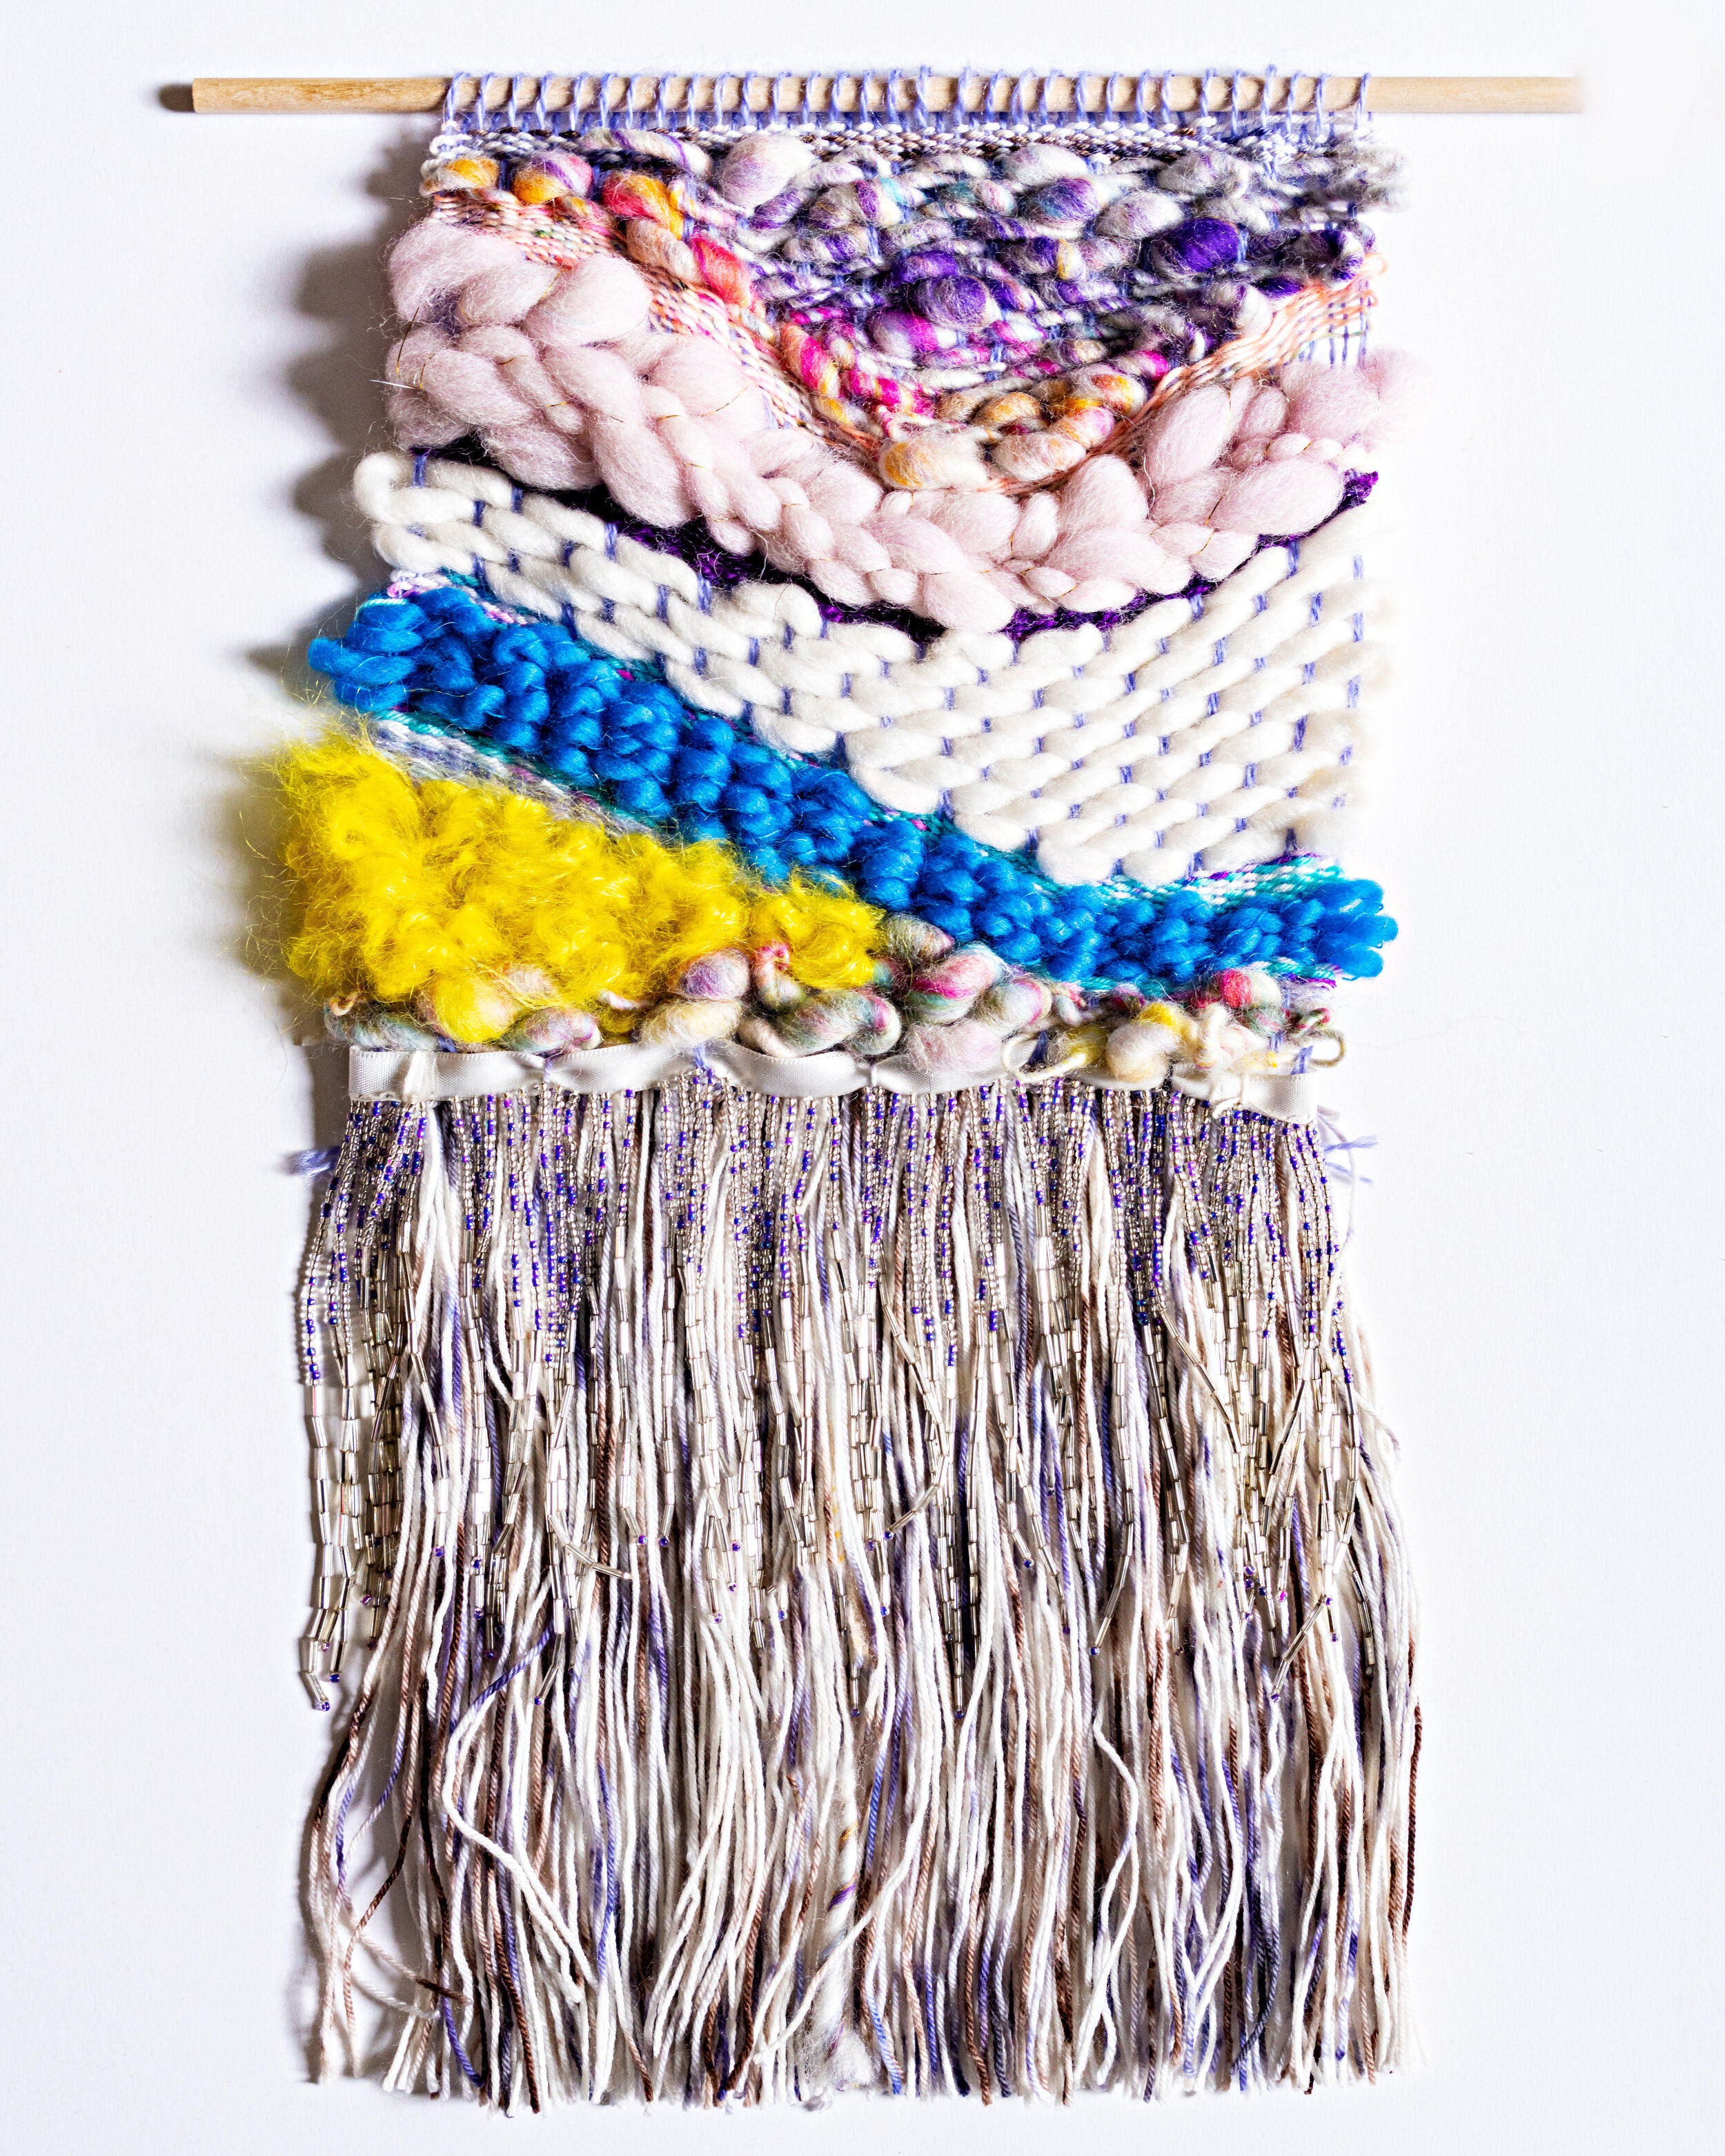 knit yarn tapestry in blue, yellow, white, purple, and beads